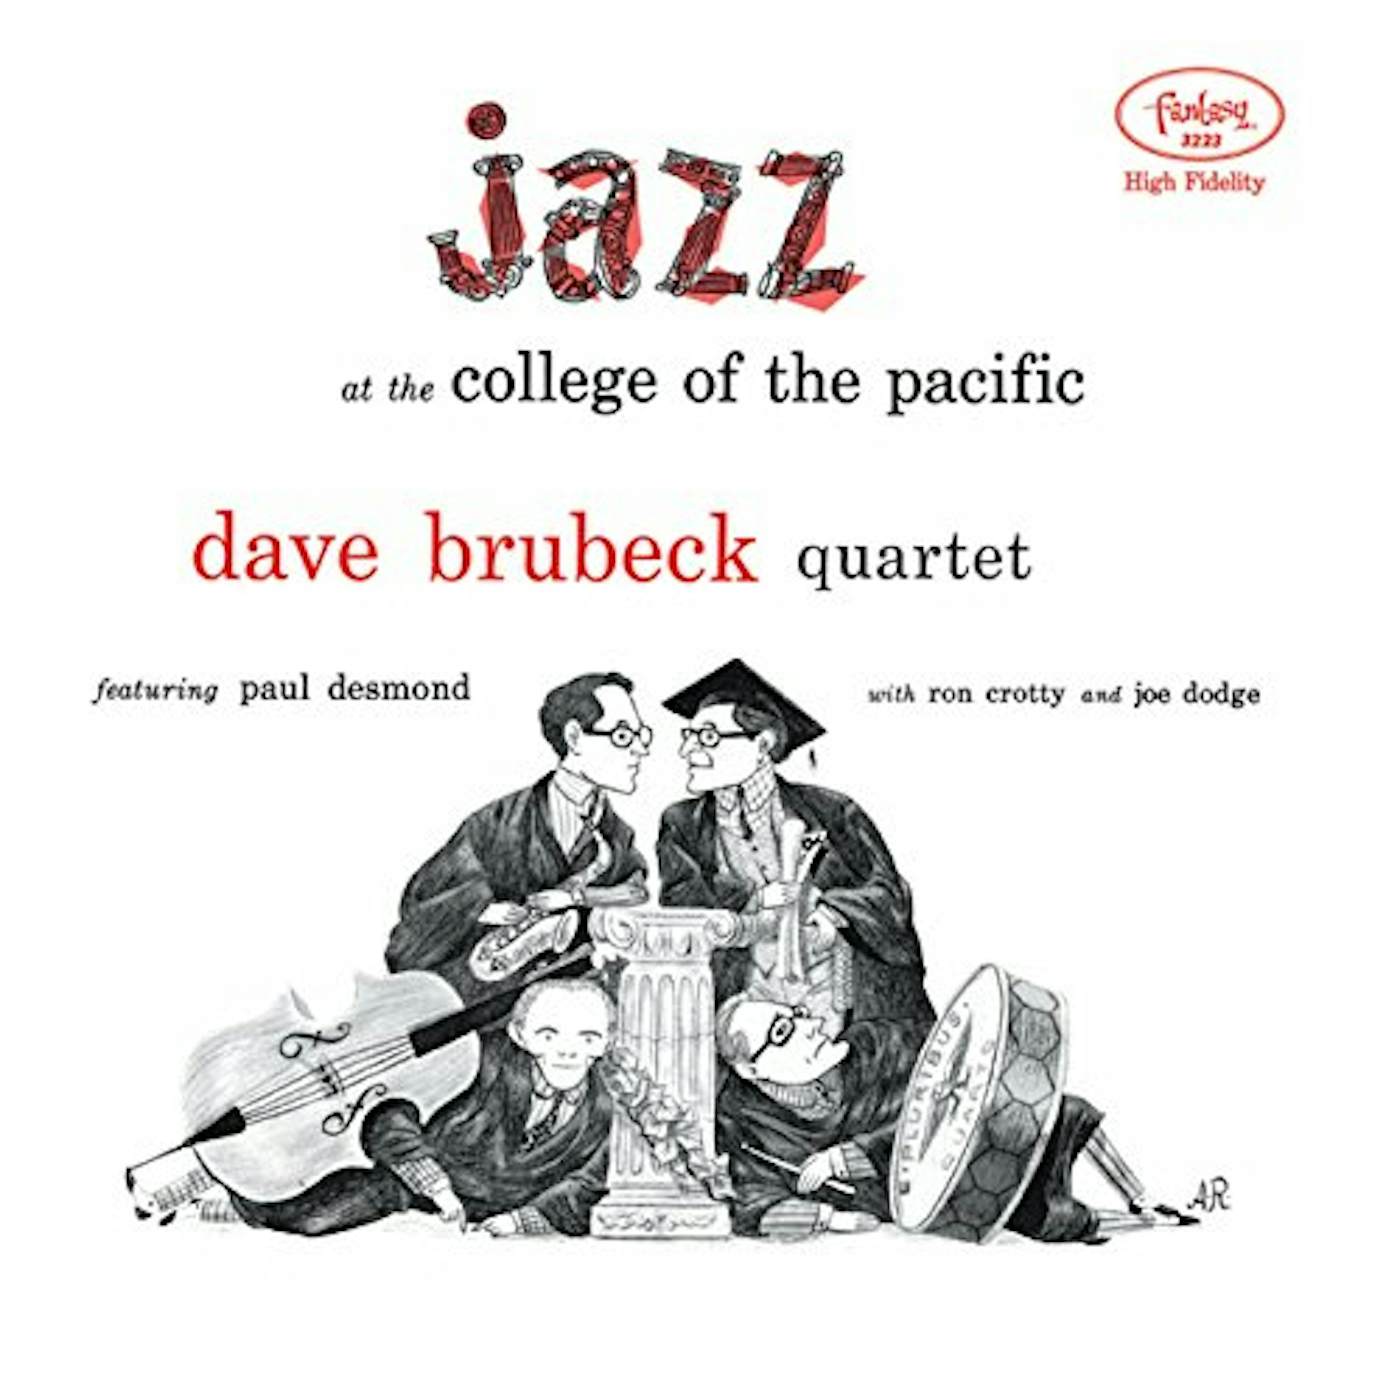 Dave Brubeck Jazz At The College Of The Pacific Vinyl Record